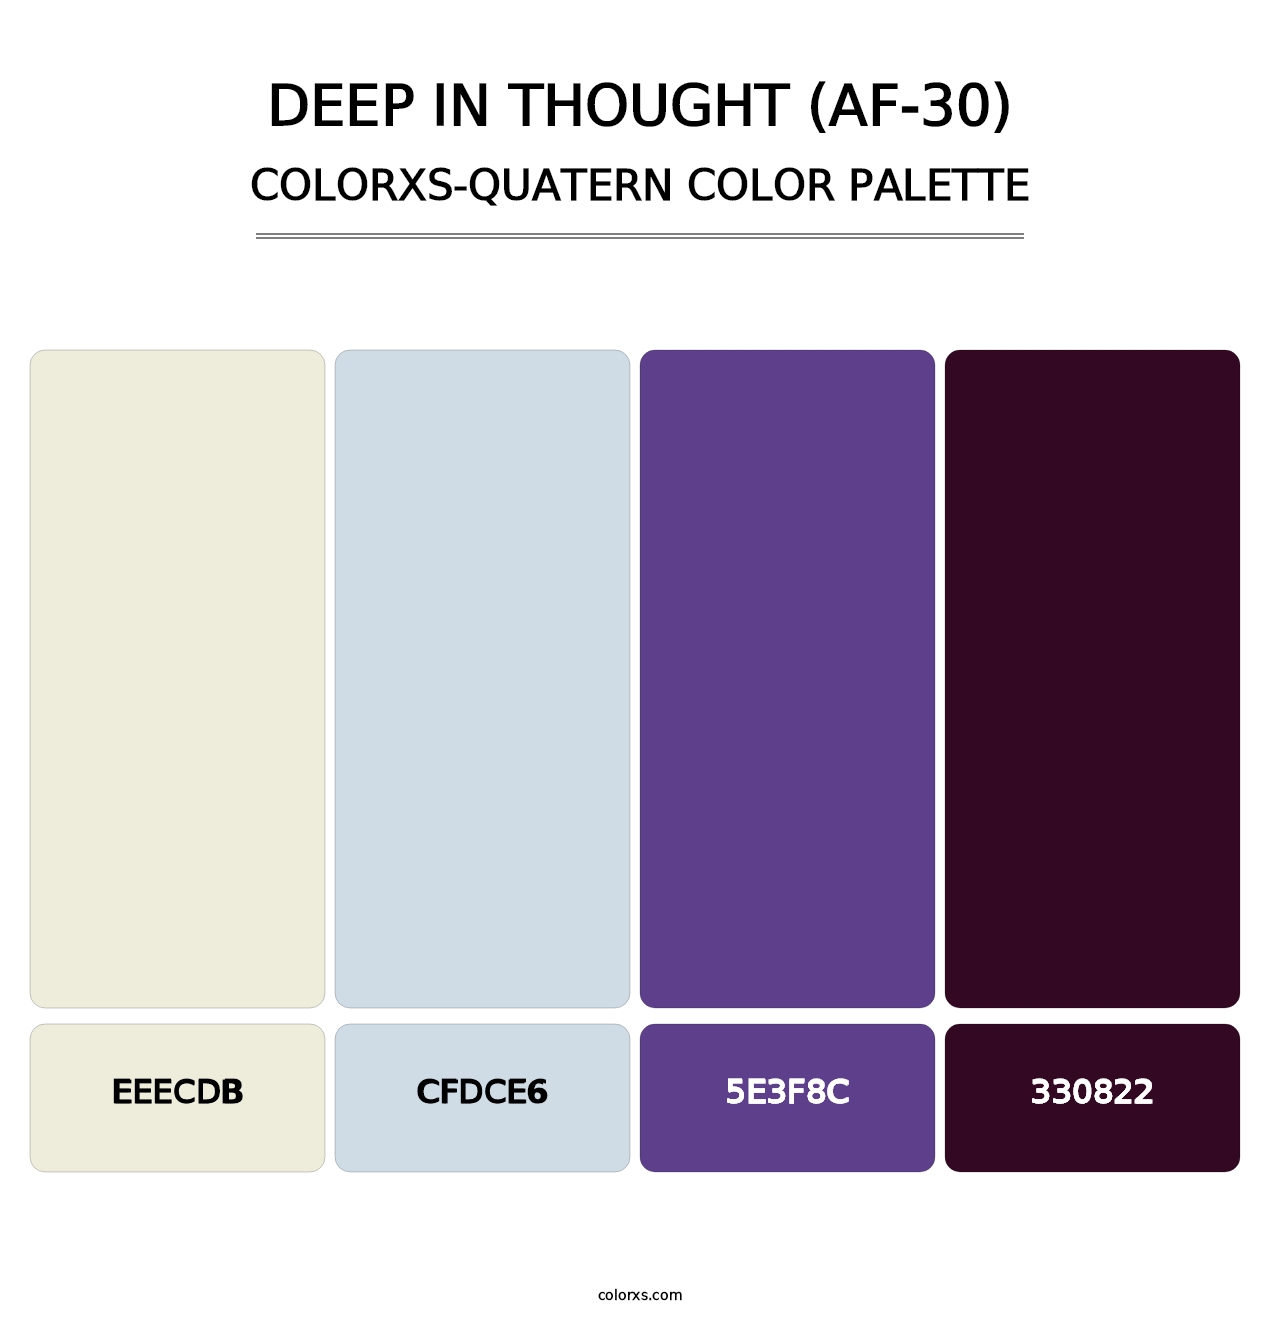 Deep in Thought (AF-30) - Colorxs Quatern Palette